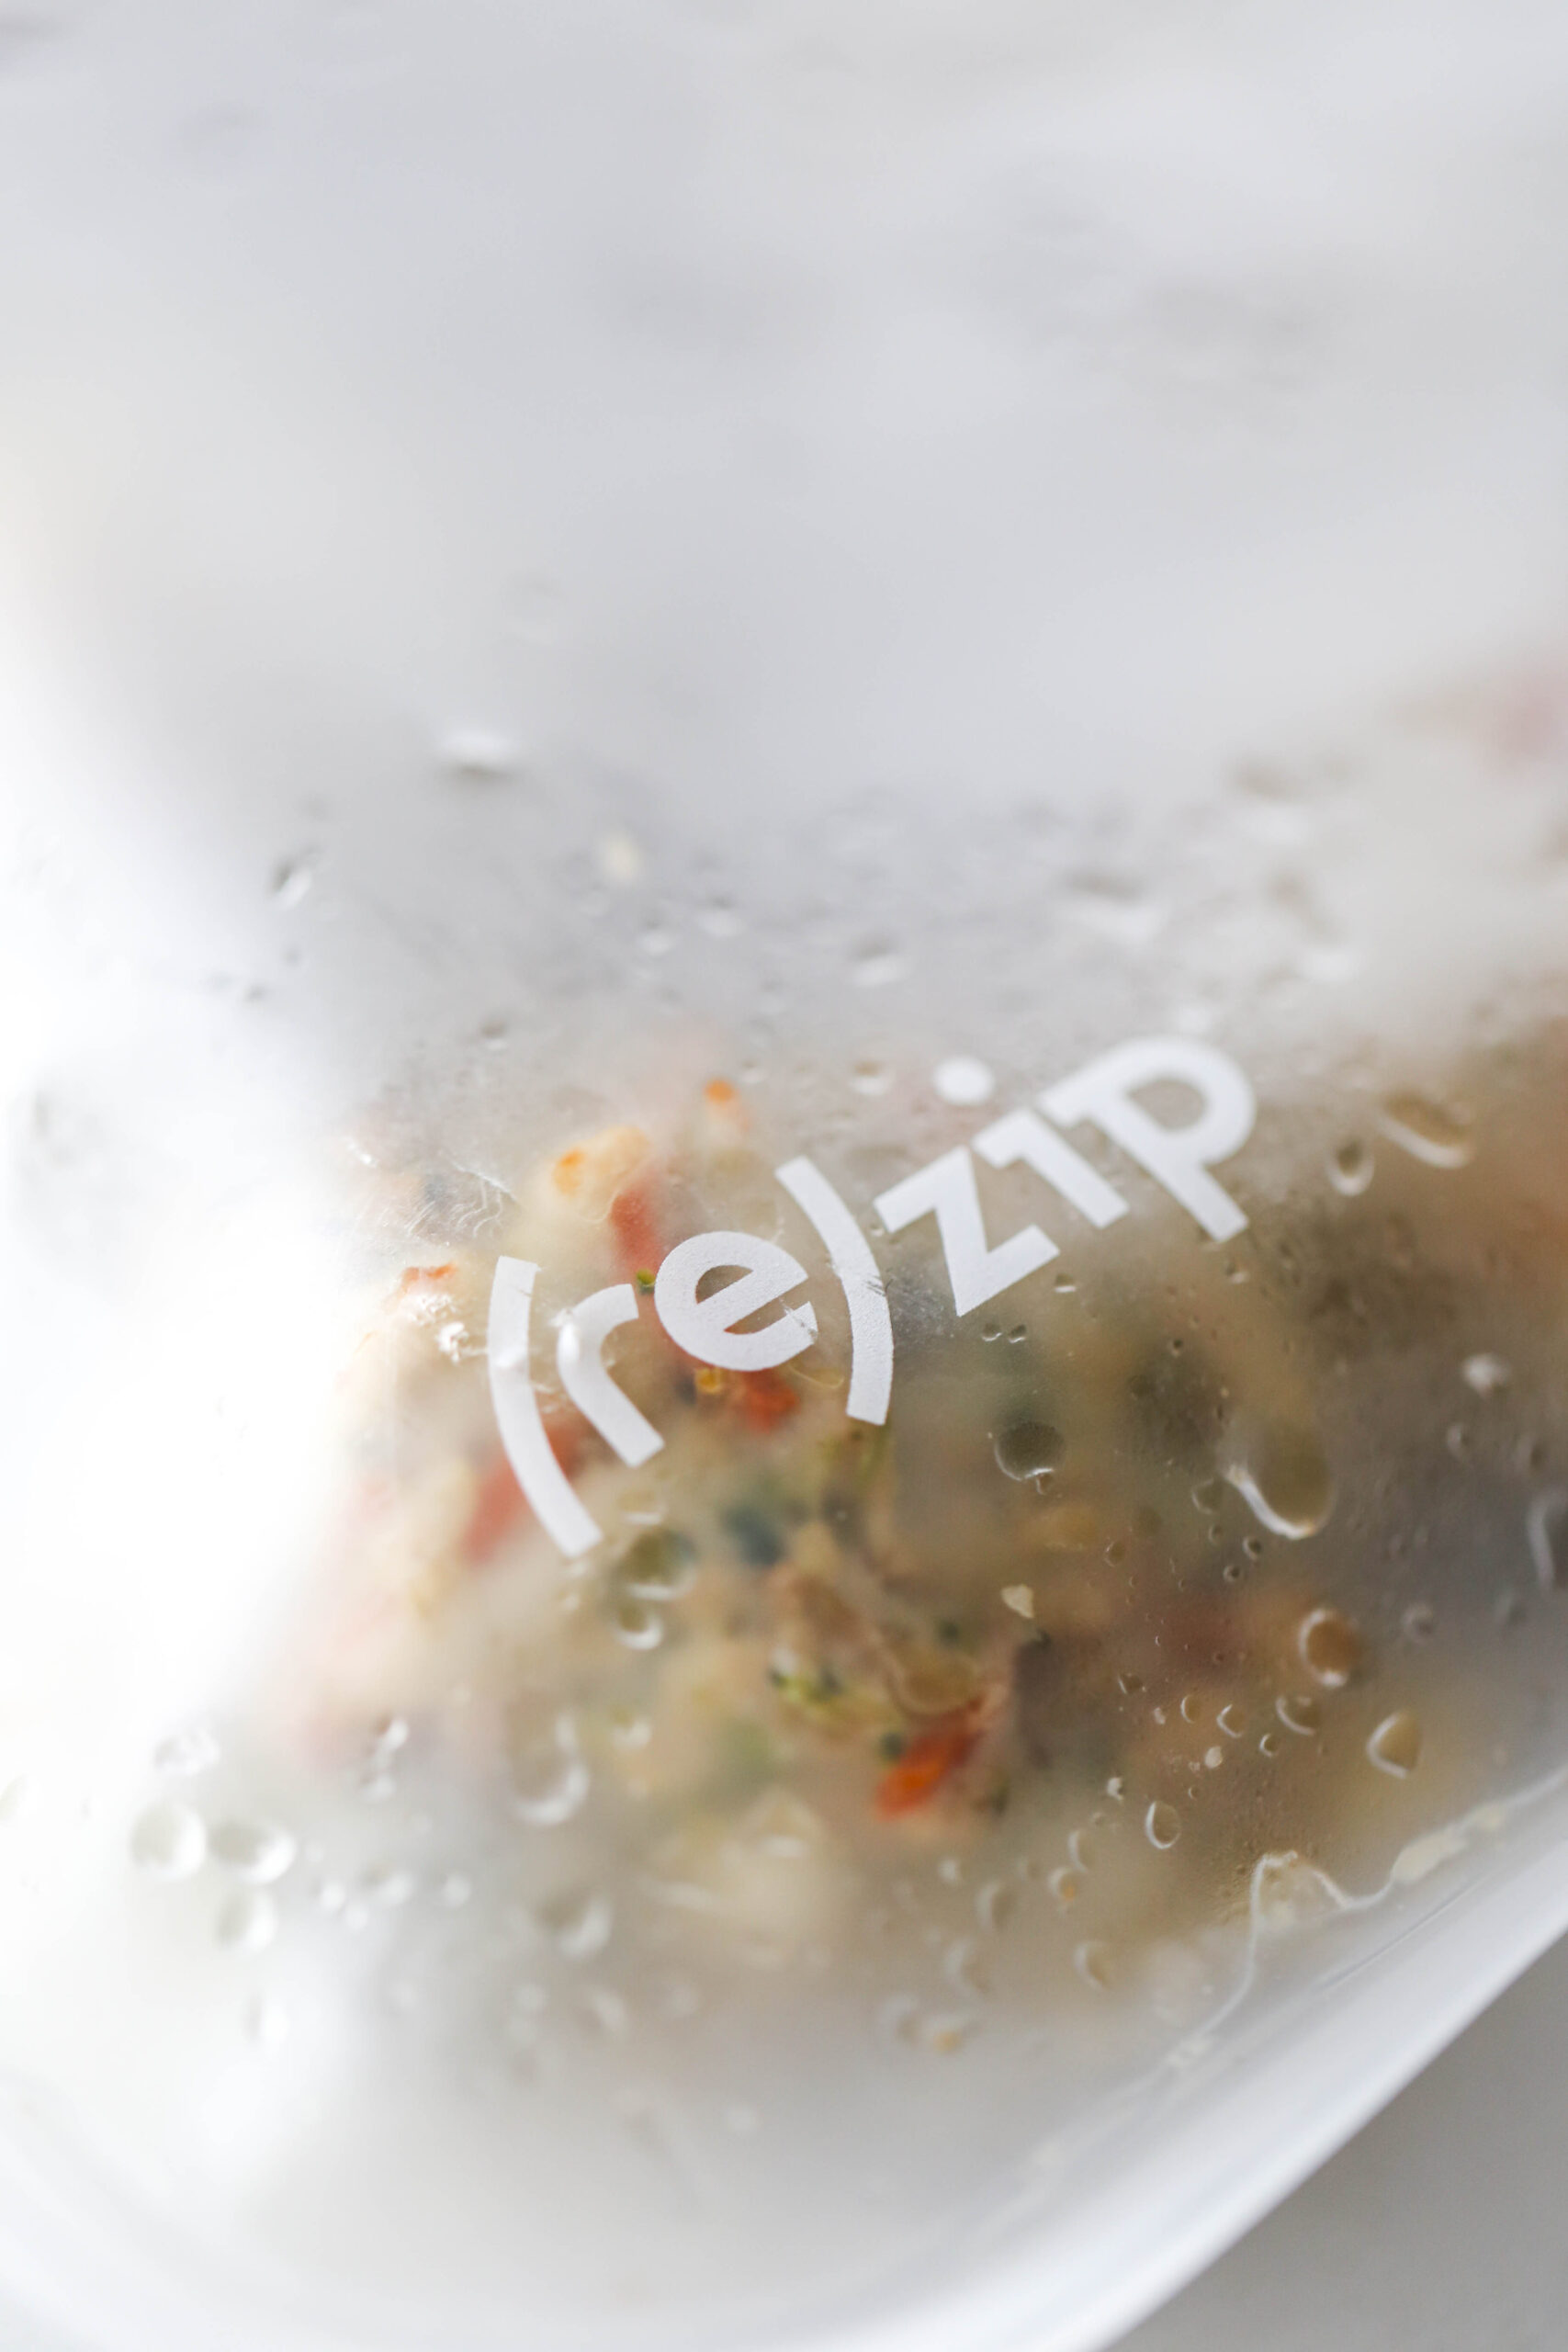 Close-up of freezer bag logo which reads (re)zip